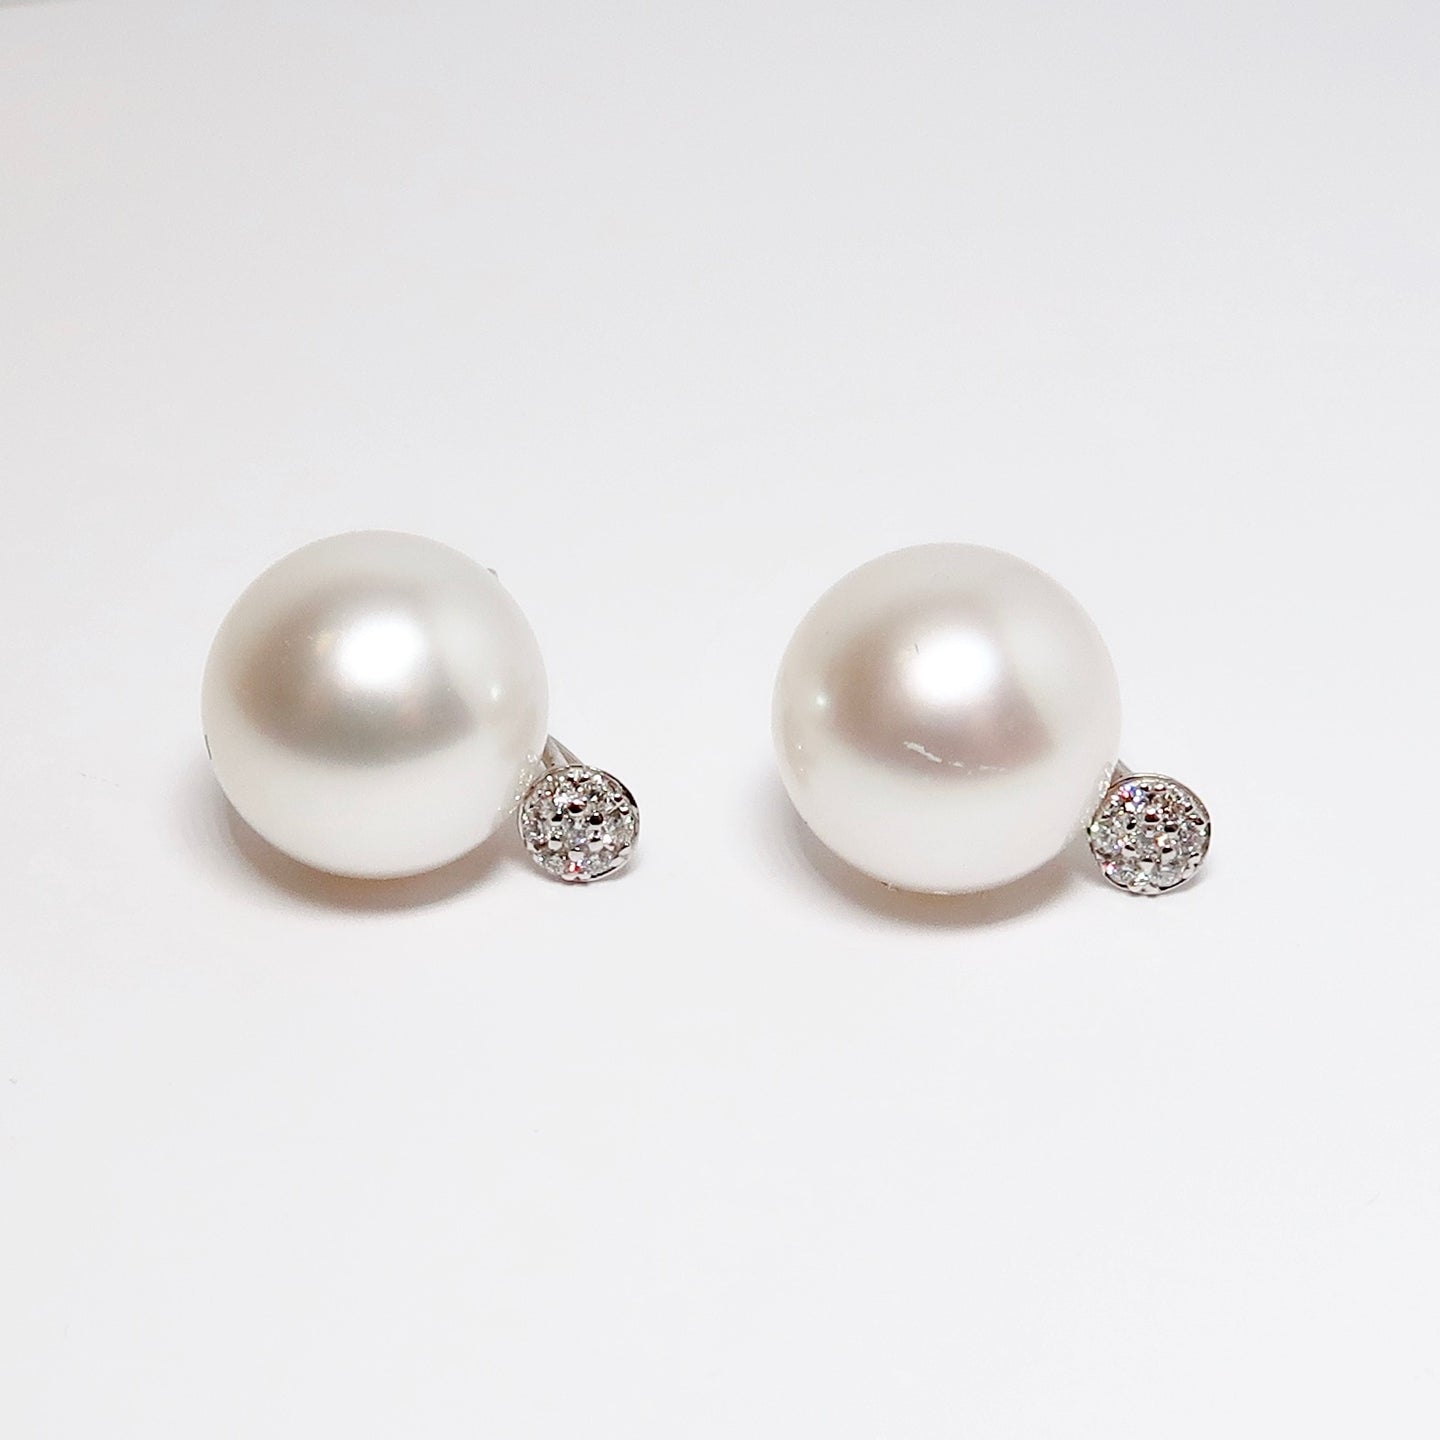 South Sea Pearl Earrings with Diamond Cluster